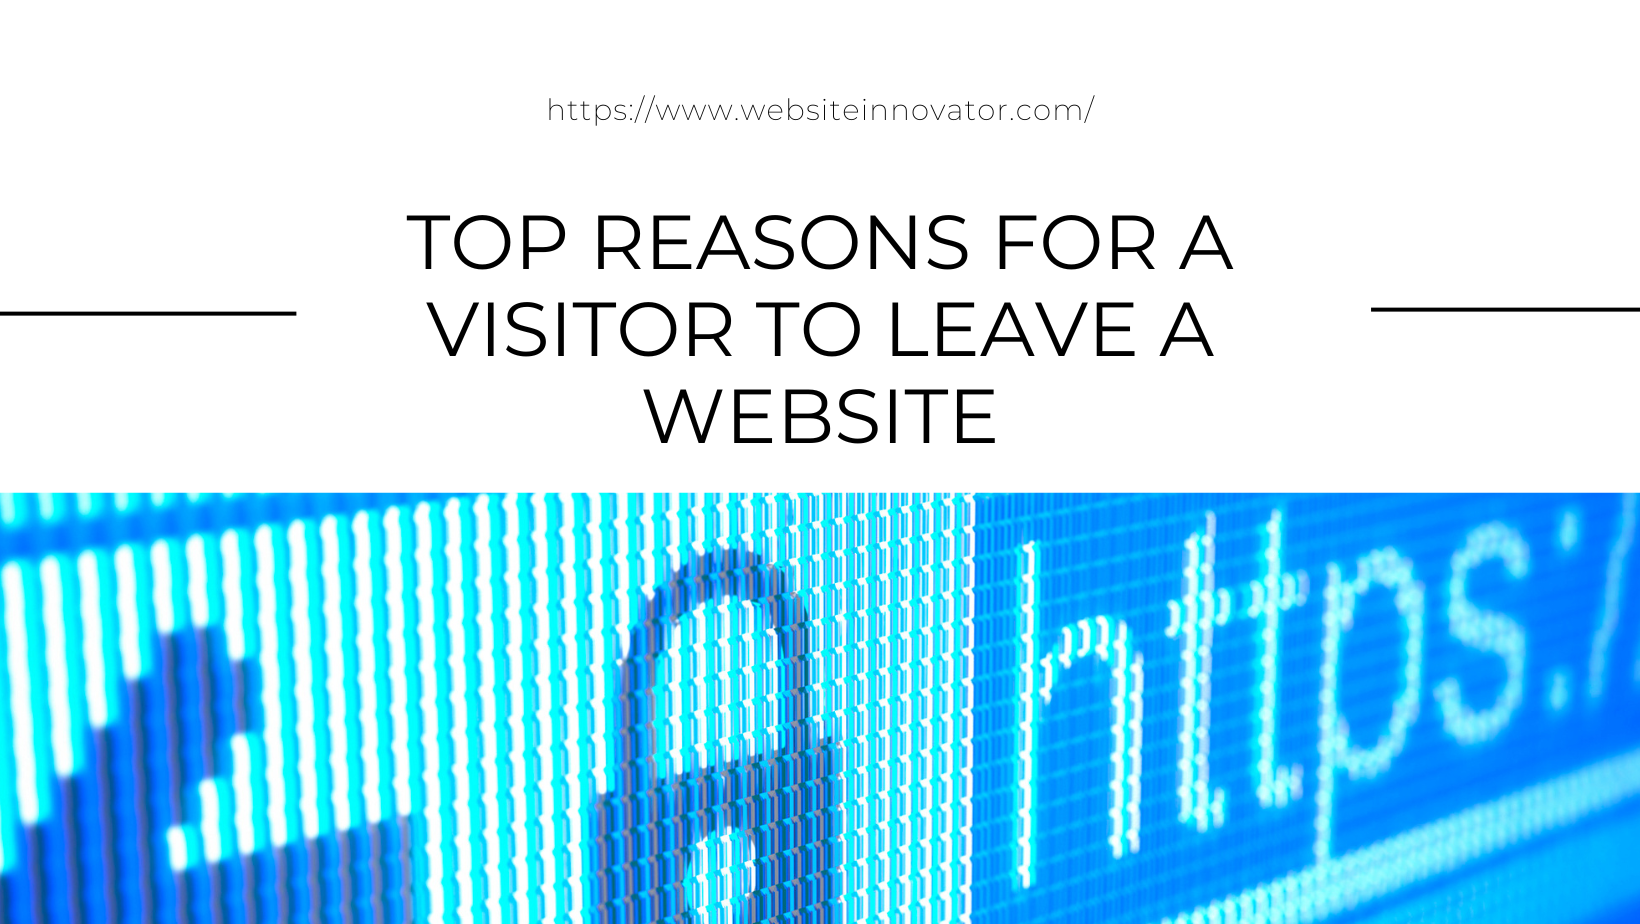 Top Reasons For a Visitor to Leave a Website